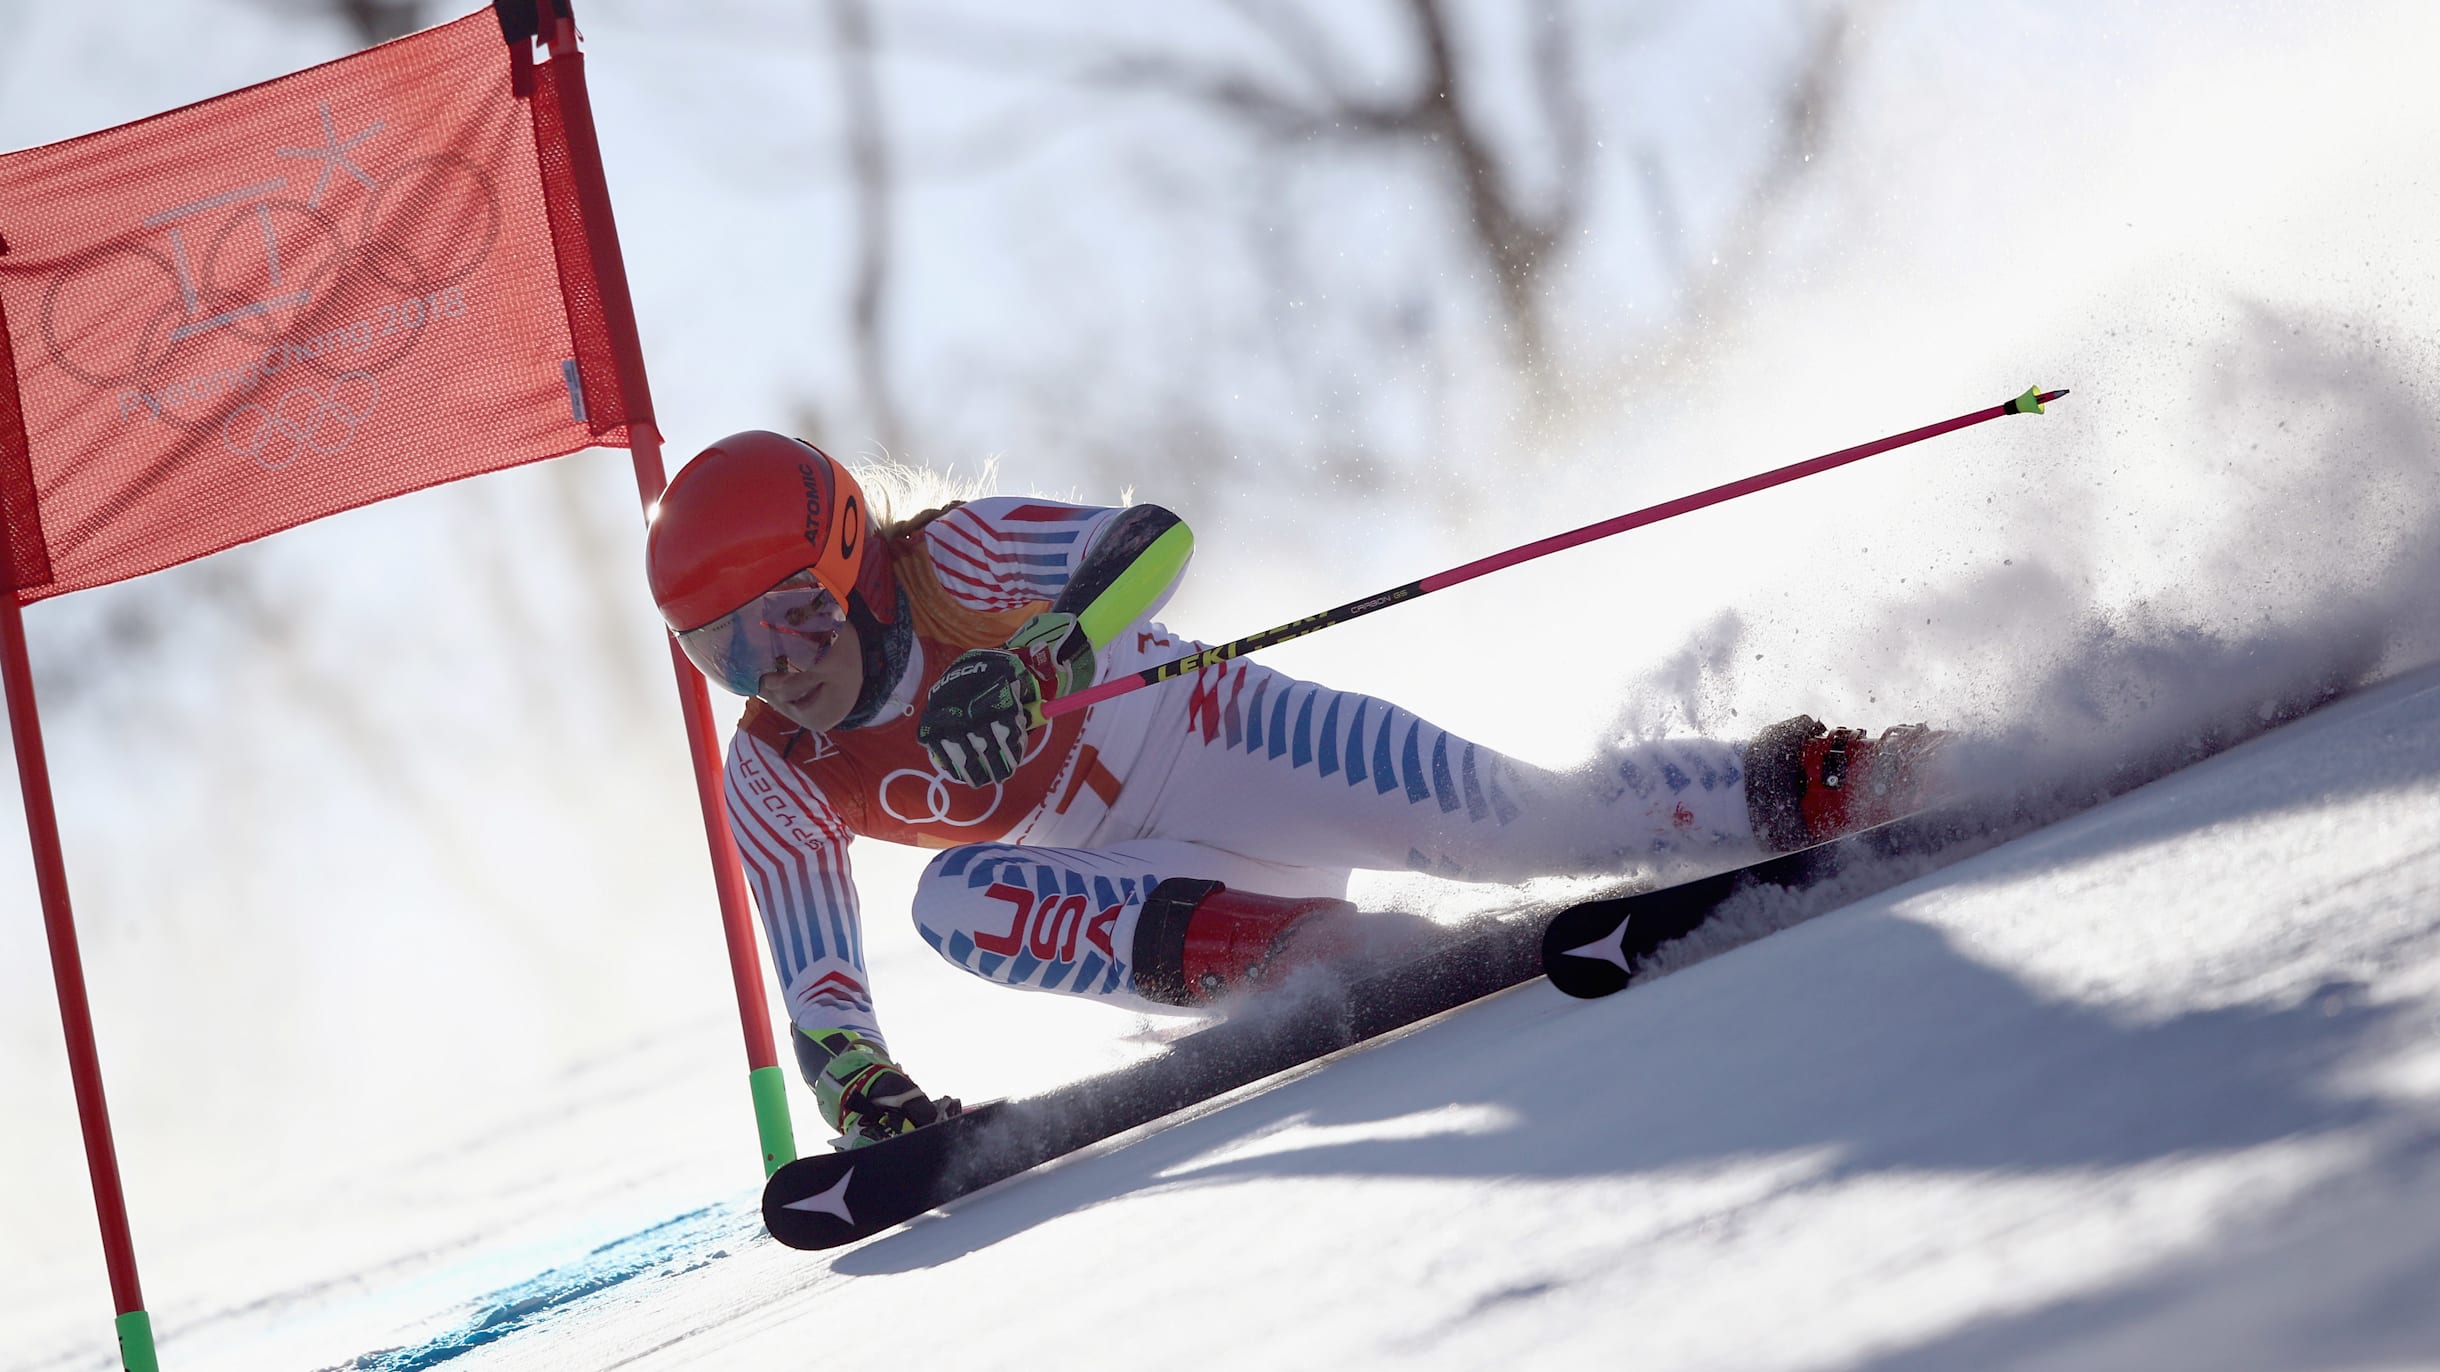 What are the differences between the alpine skiing disciplines?